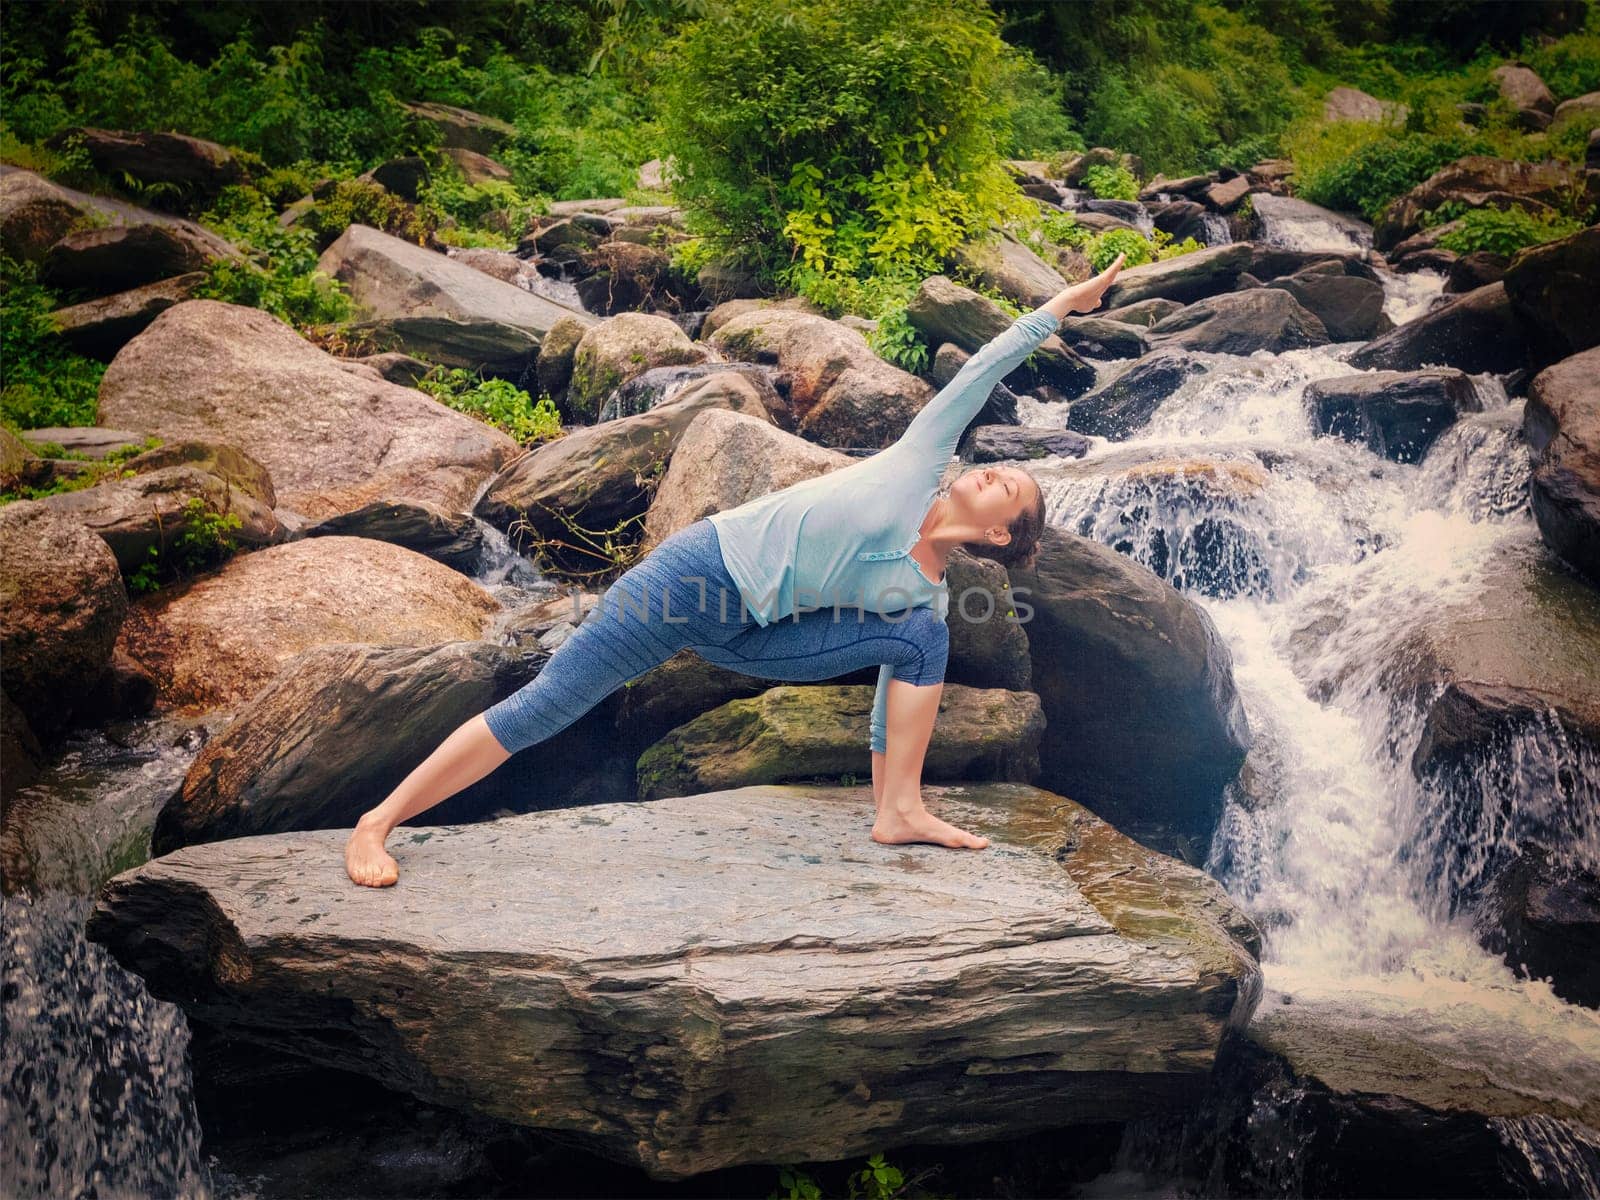 Vintage retro effect hipster style image of fit woman practices yoga asana Utthita Parsvakonasana - extended side angle pose outdoors at water